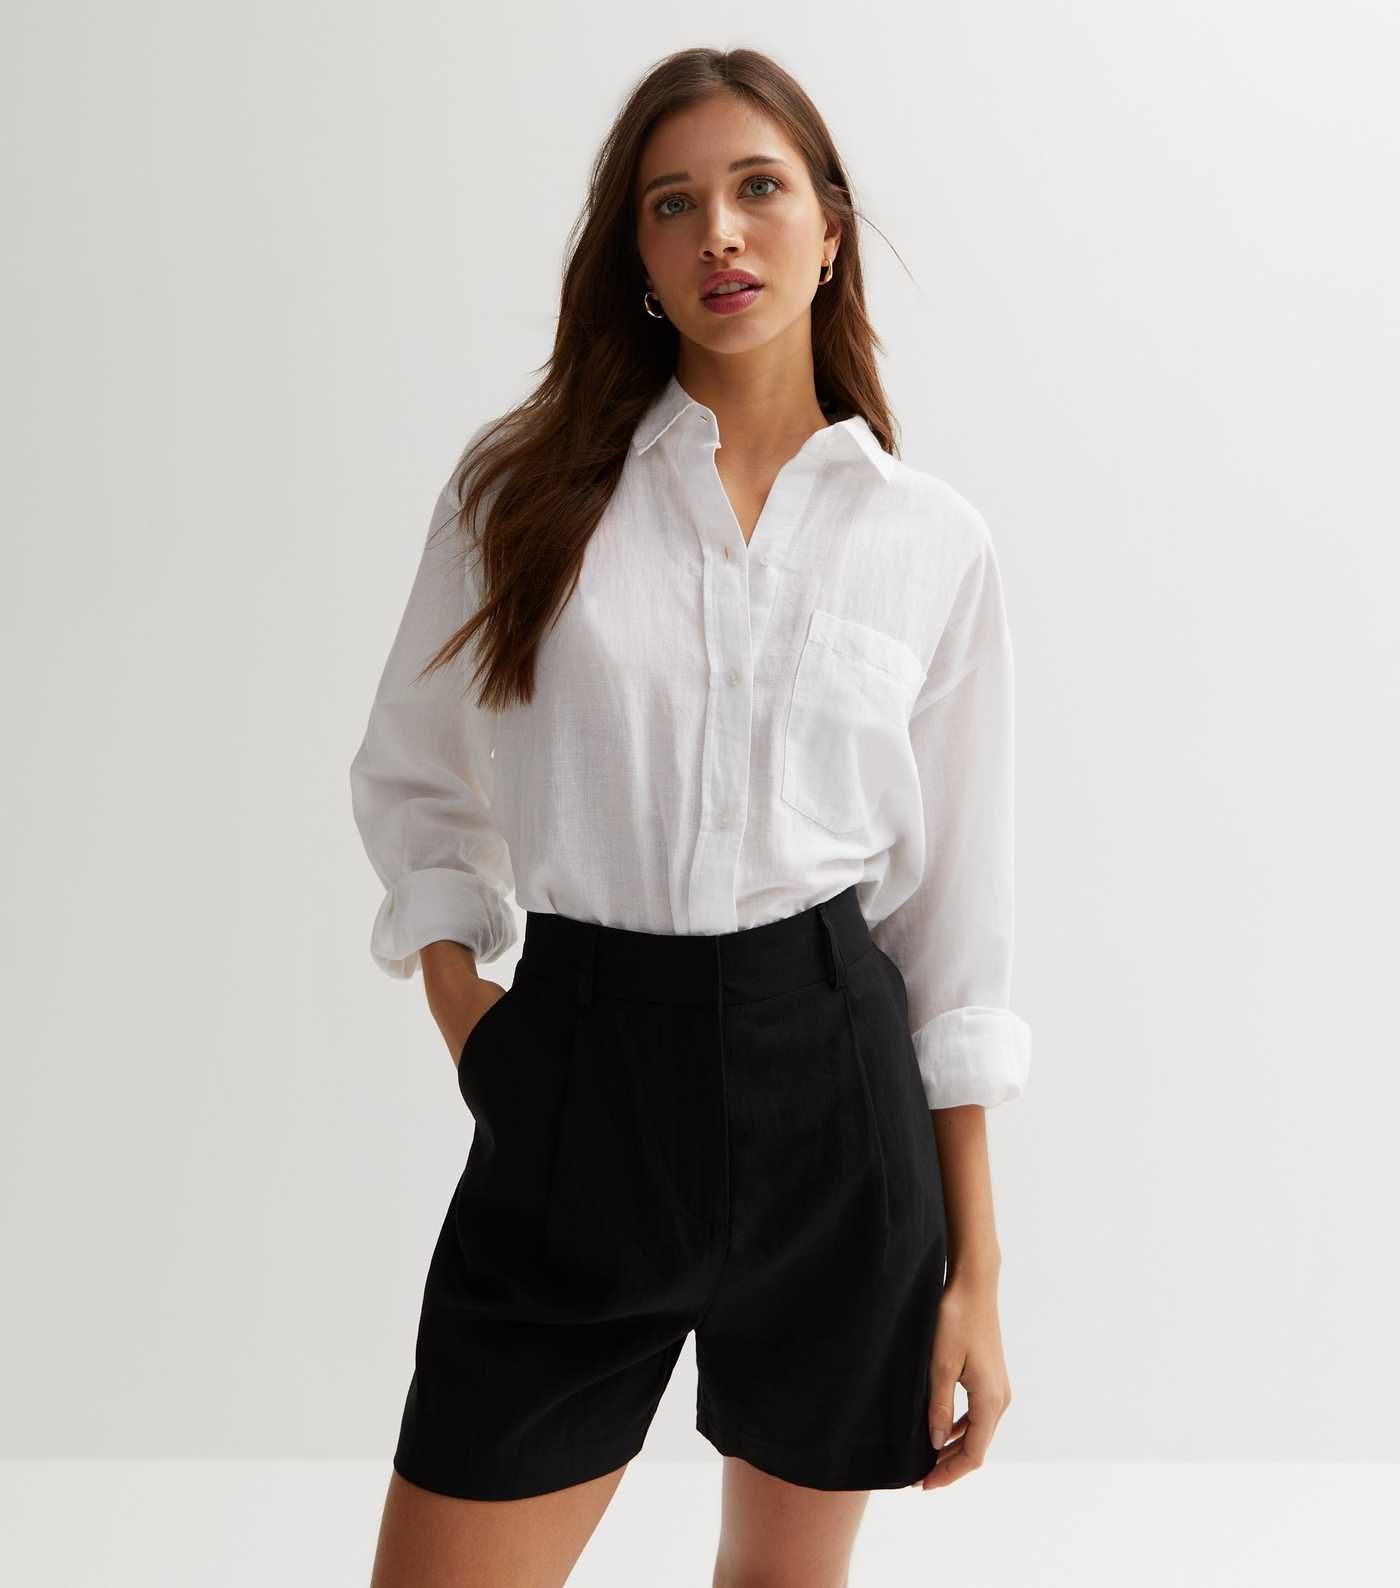 Black Linen Blend High Waist Formal Shorts
						
						Add to Saved Items
						Remove from Save... | New Look (UK)